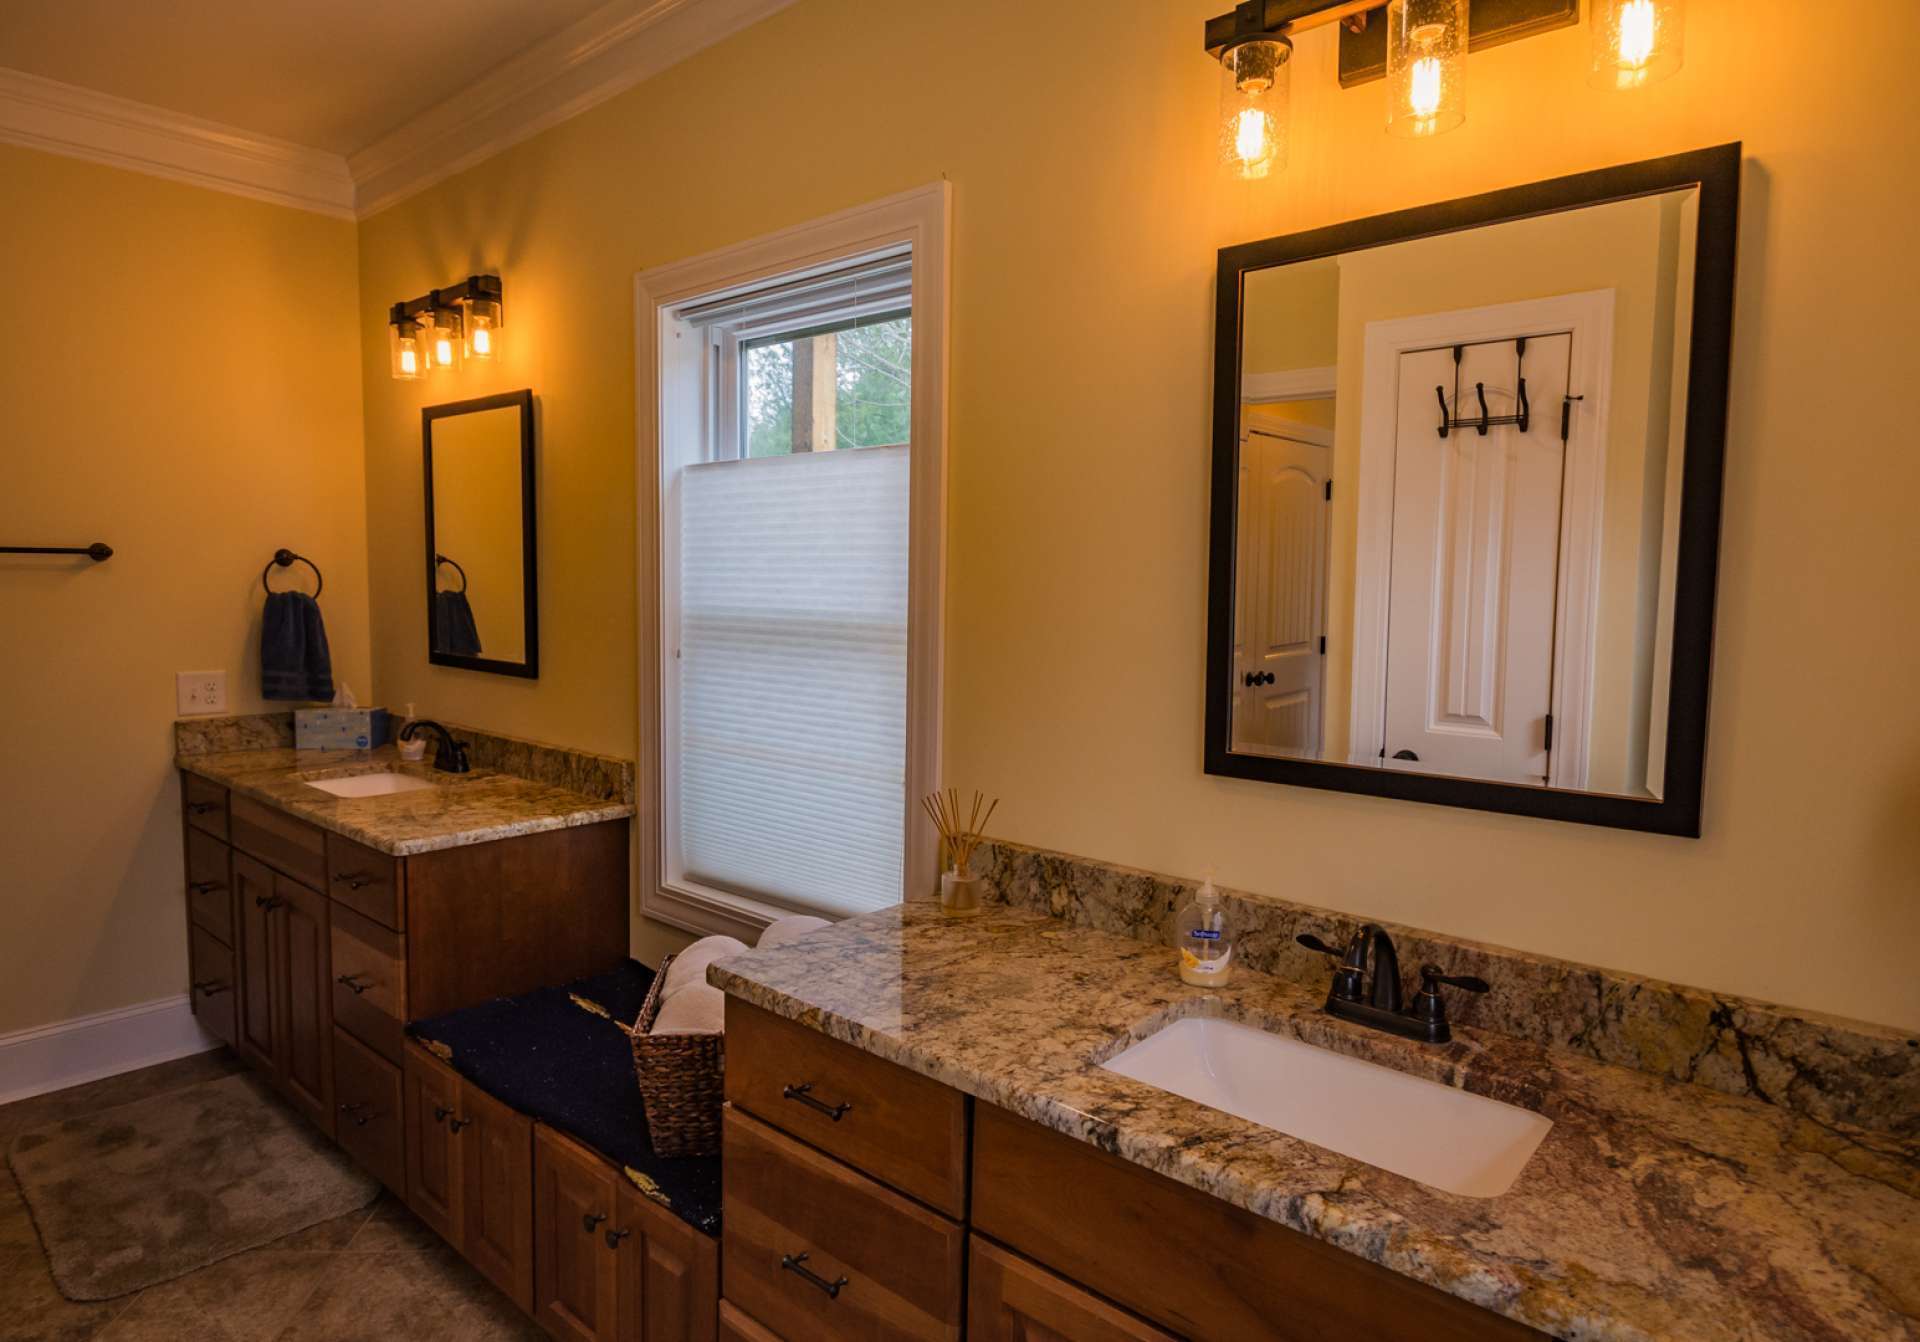 The luxurious master bath features Kraftmaid double vanities with granite tops, a tiled shower and walk-in closet.